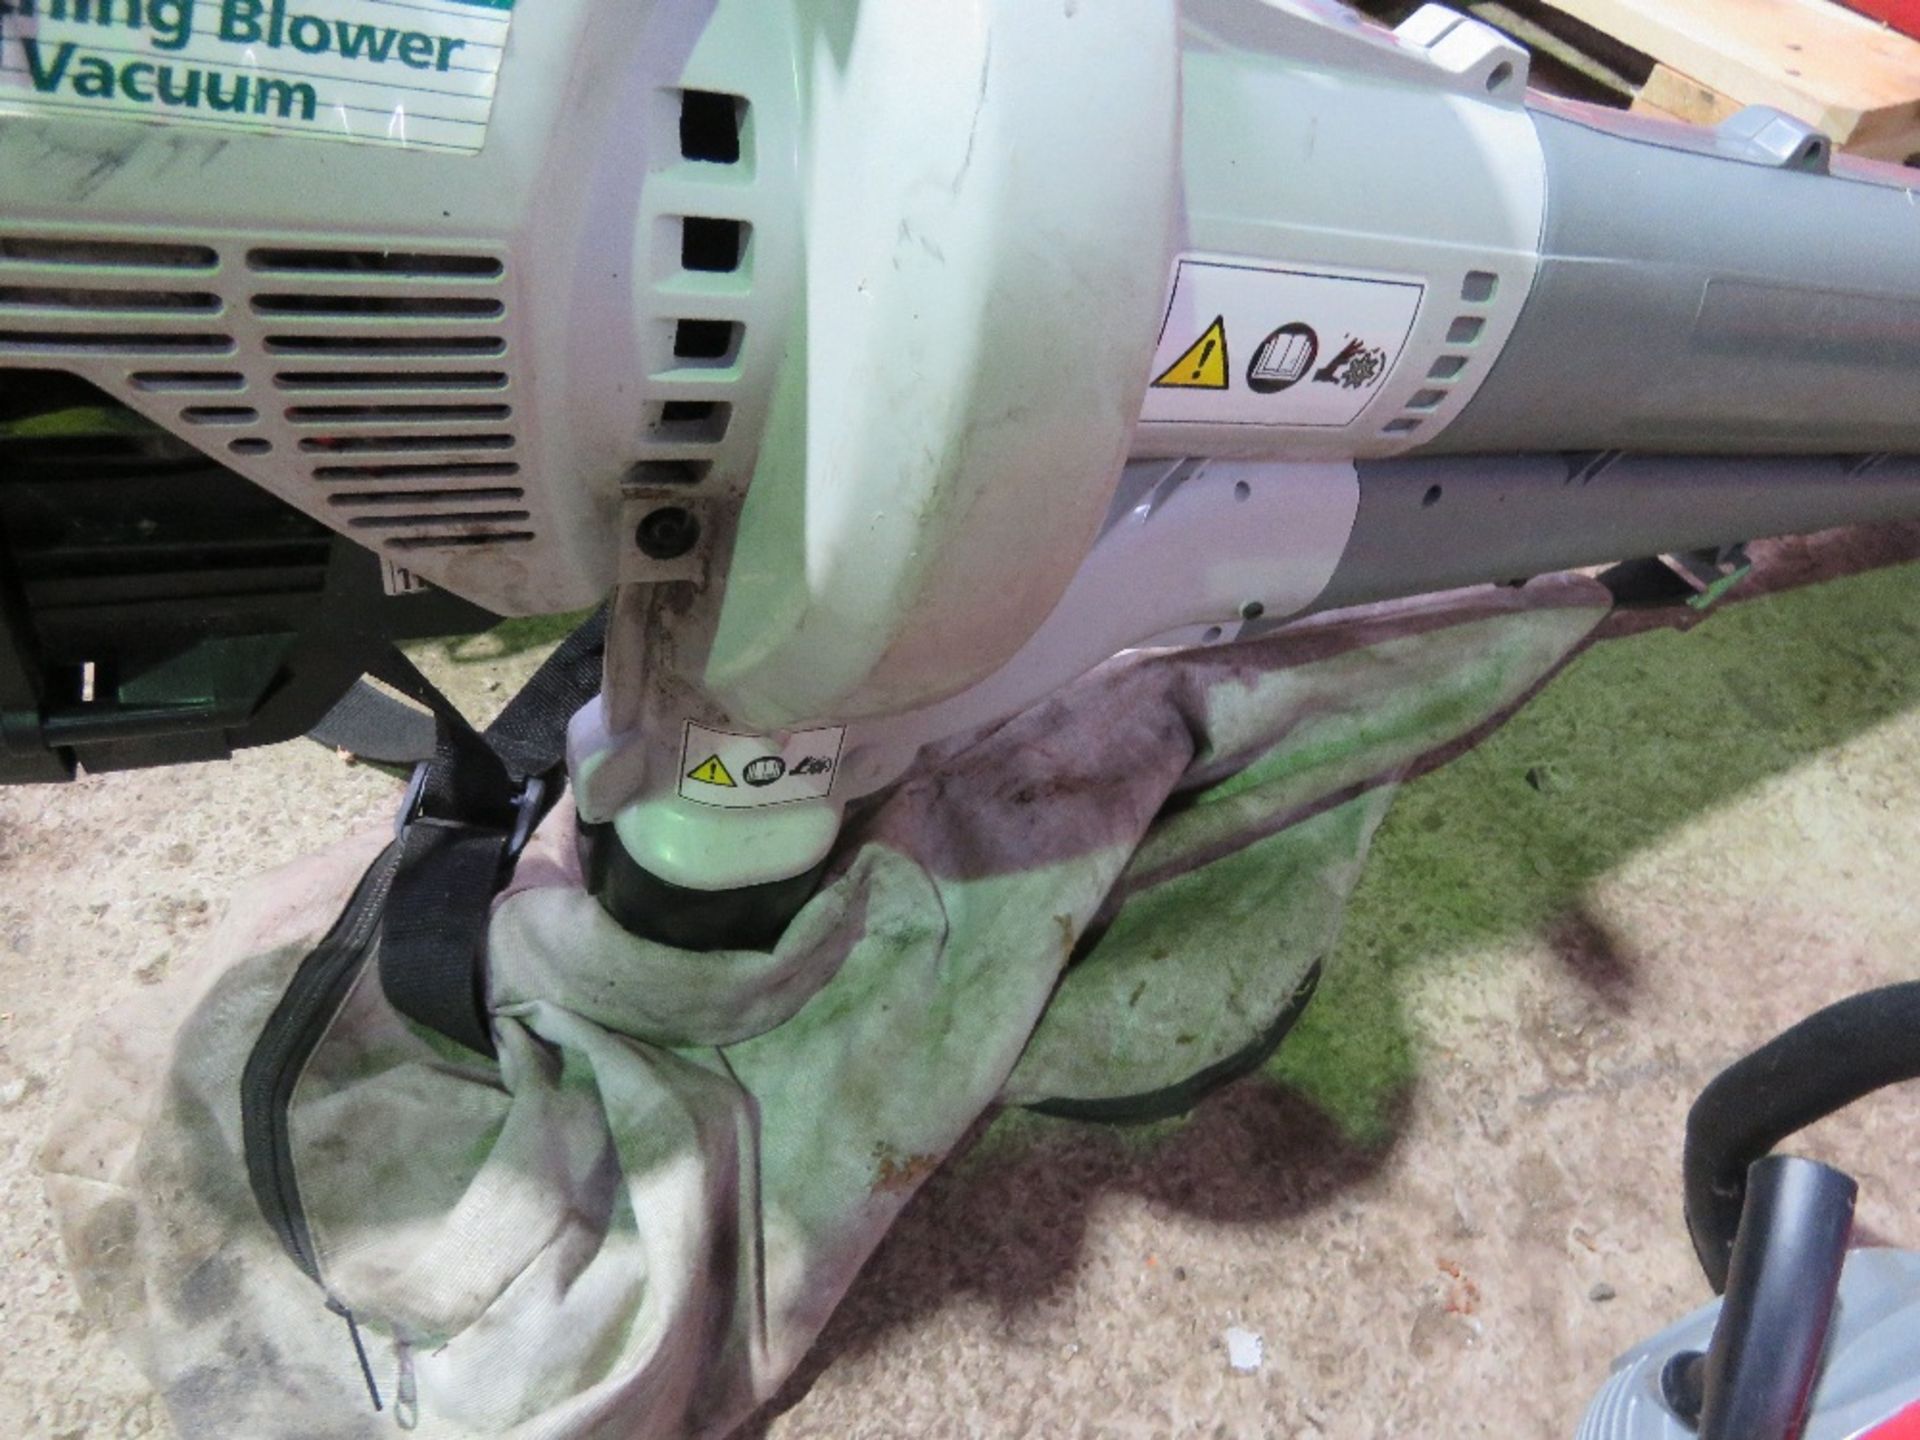 RYOBI MULCHING GARDEN VACUUM. THIS LOT IS SOLD UNDER THE AUCTIONEERS MARGIN SCHEME, THEREFORE NO - Image 4 of 5